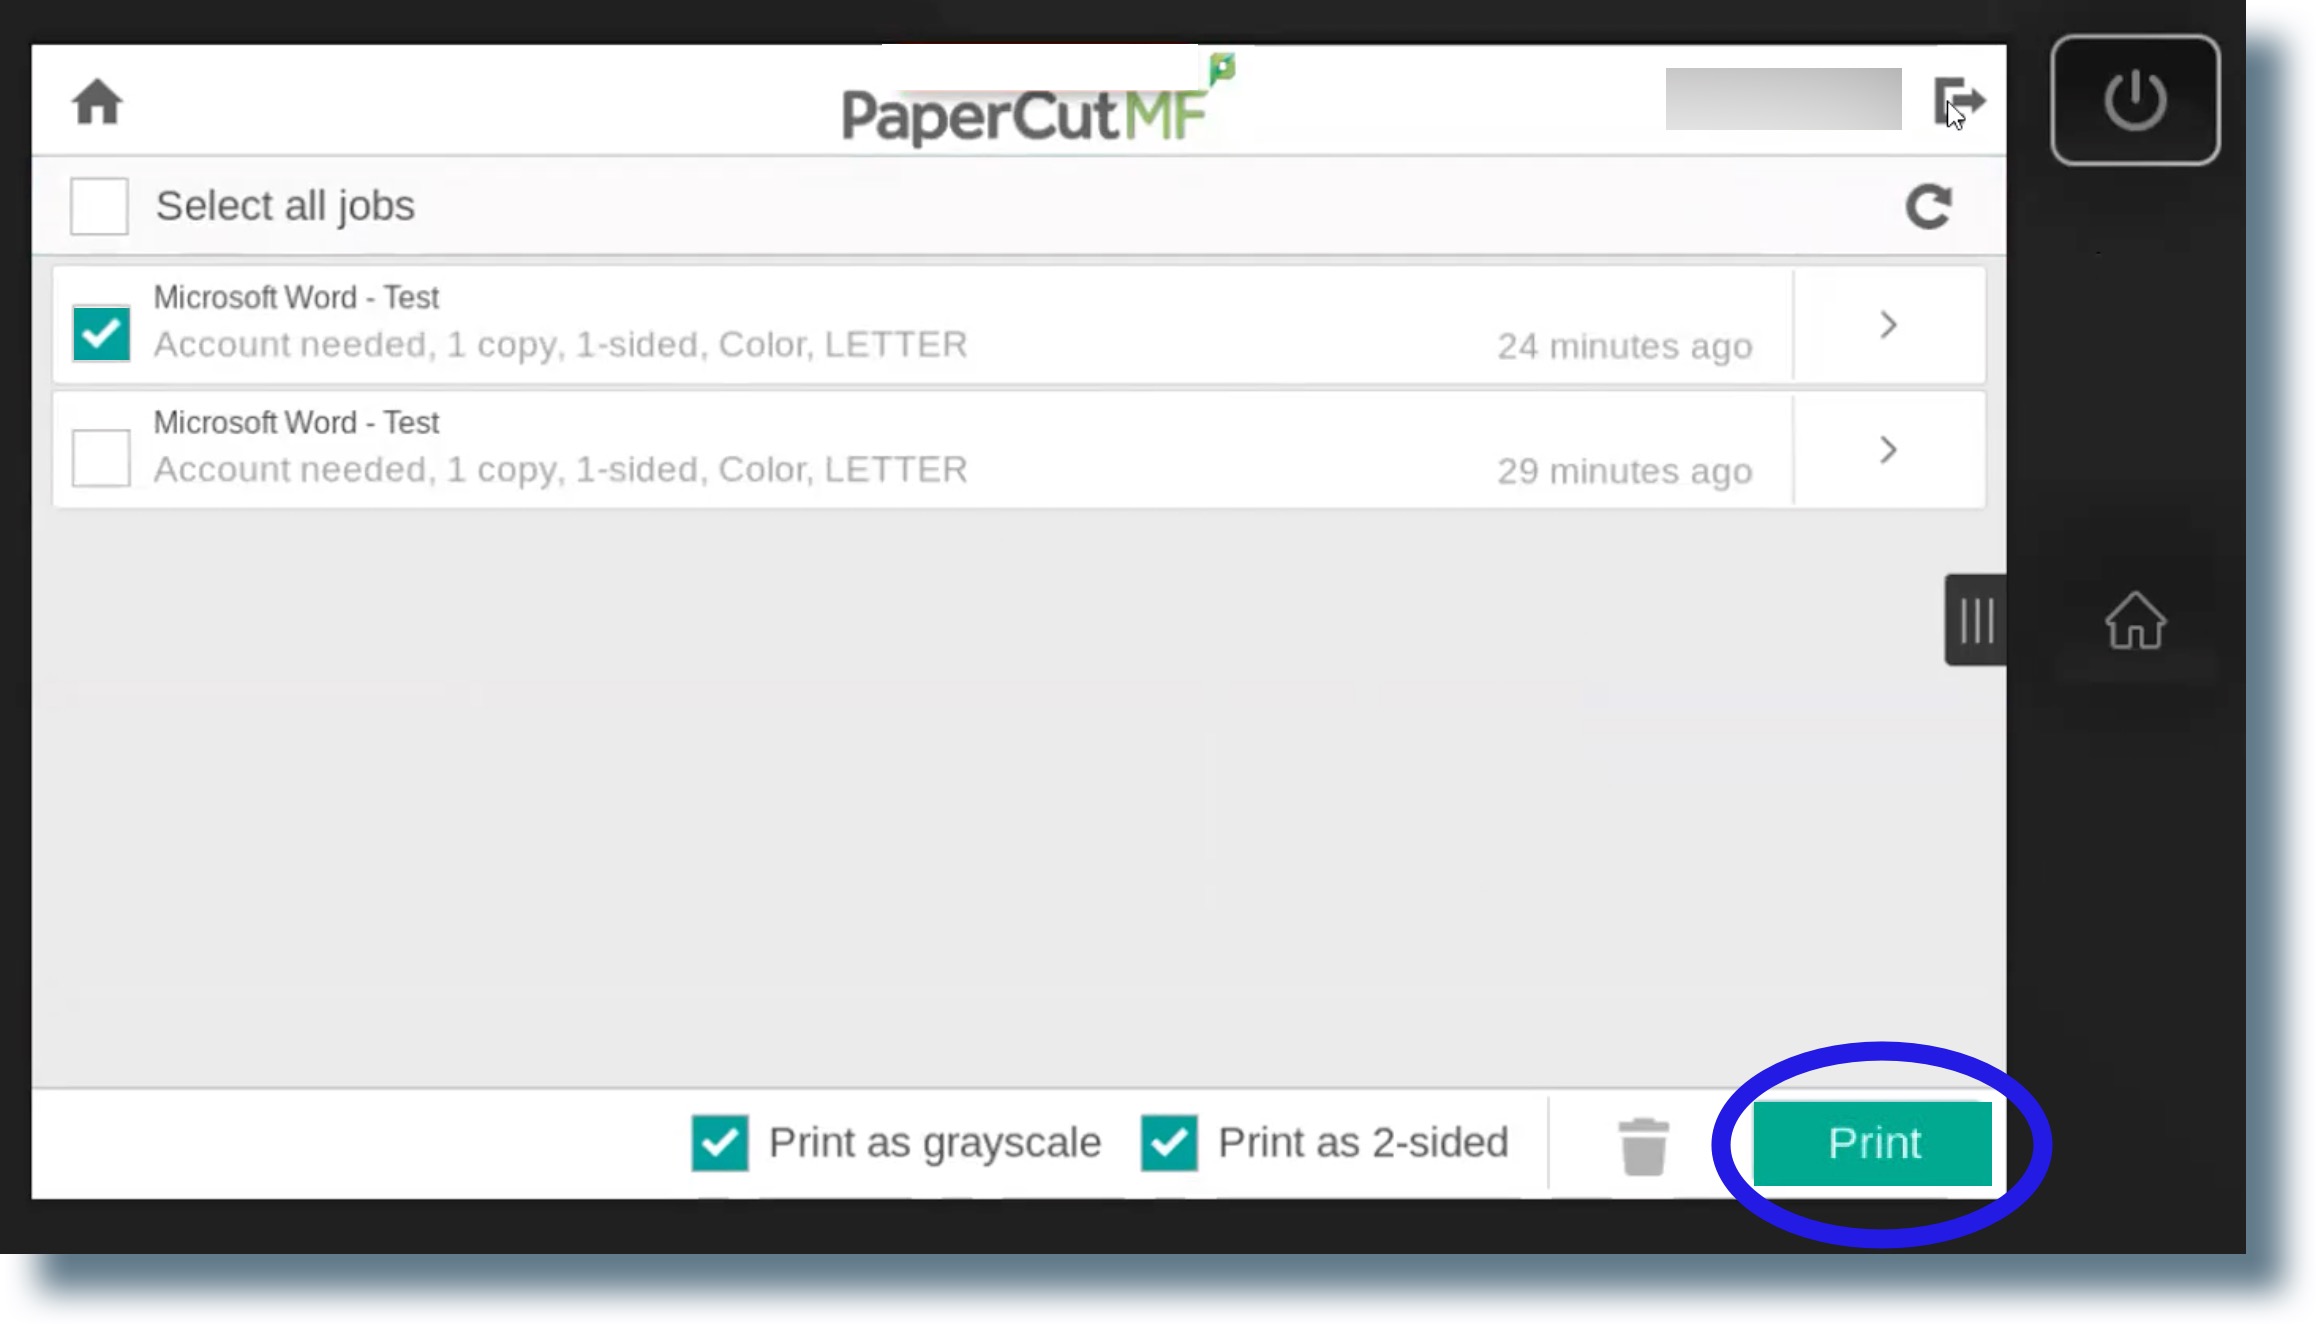 Select the print jobs you want to release; optionally, click on the check mark next to 'grayscale' to change to color, or click on '2-sided' check mark to change to single sided, then click 'Print' to print your document(s).